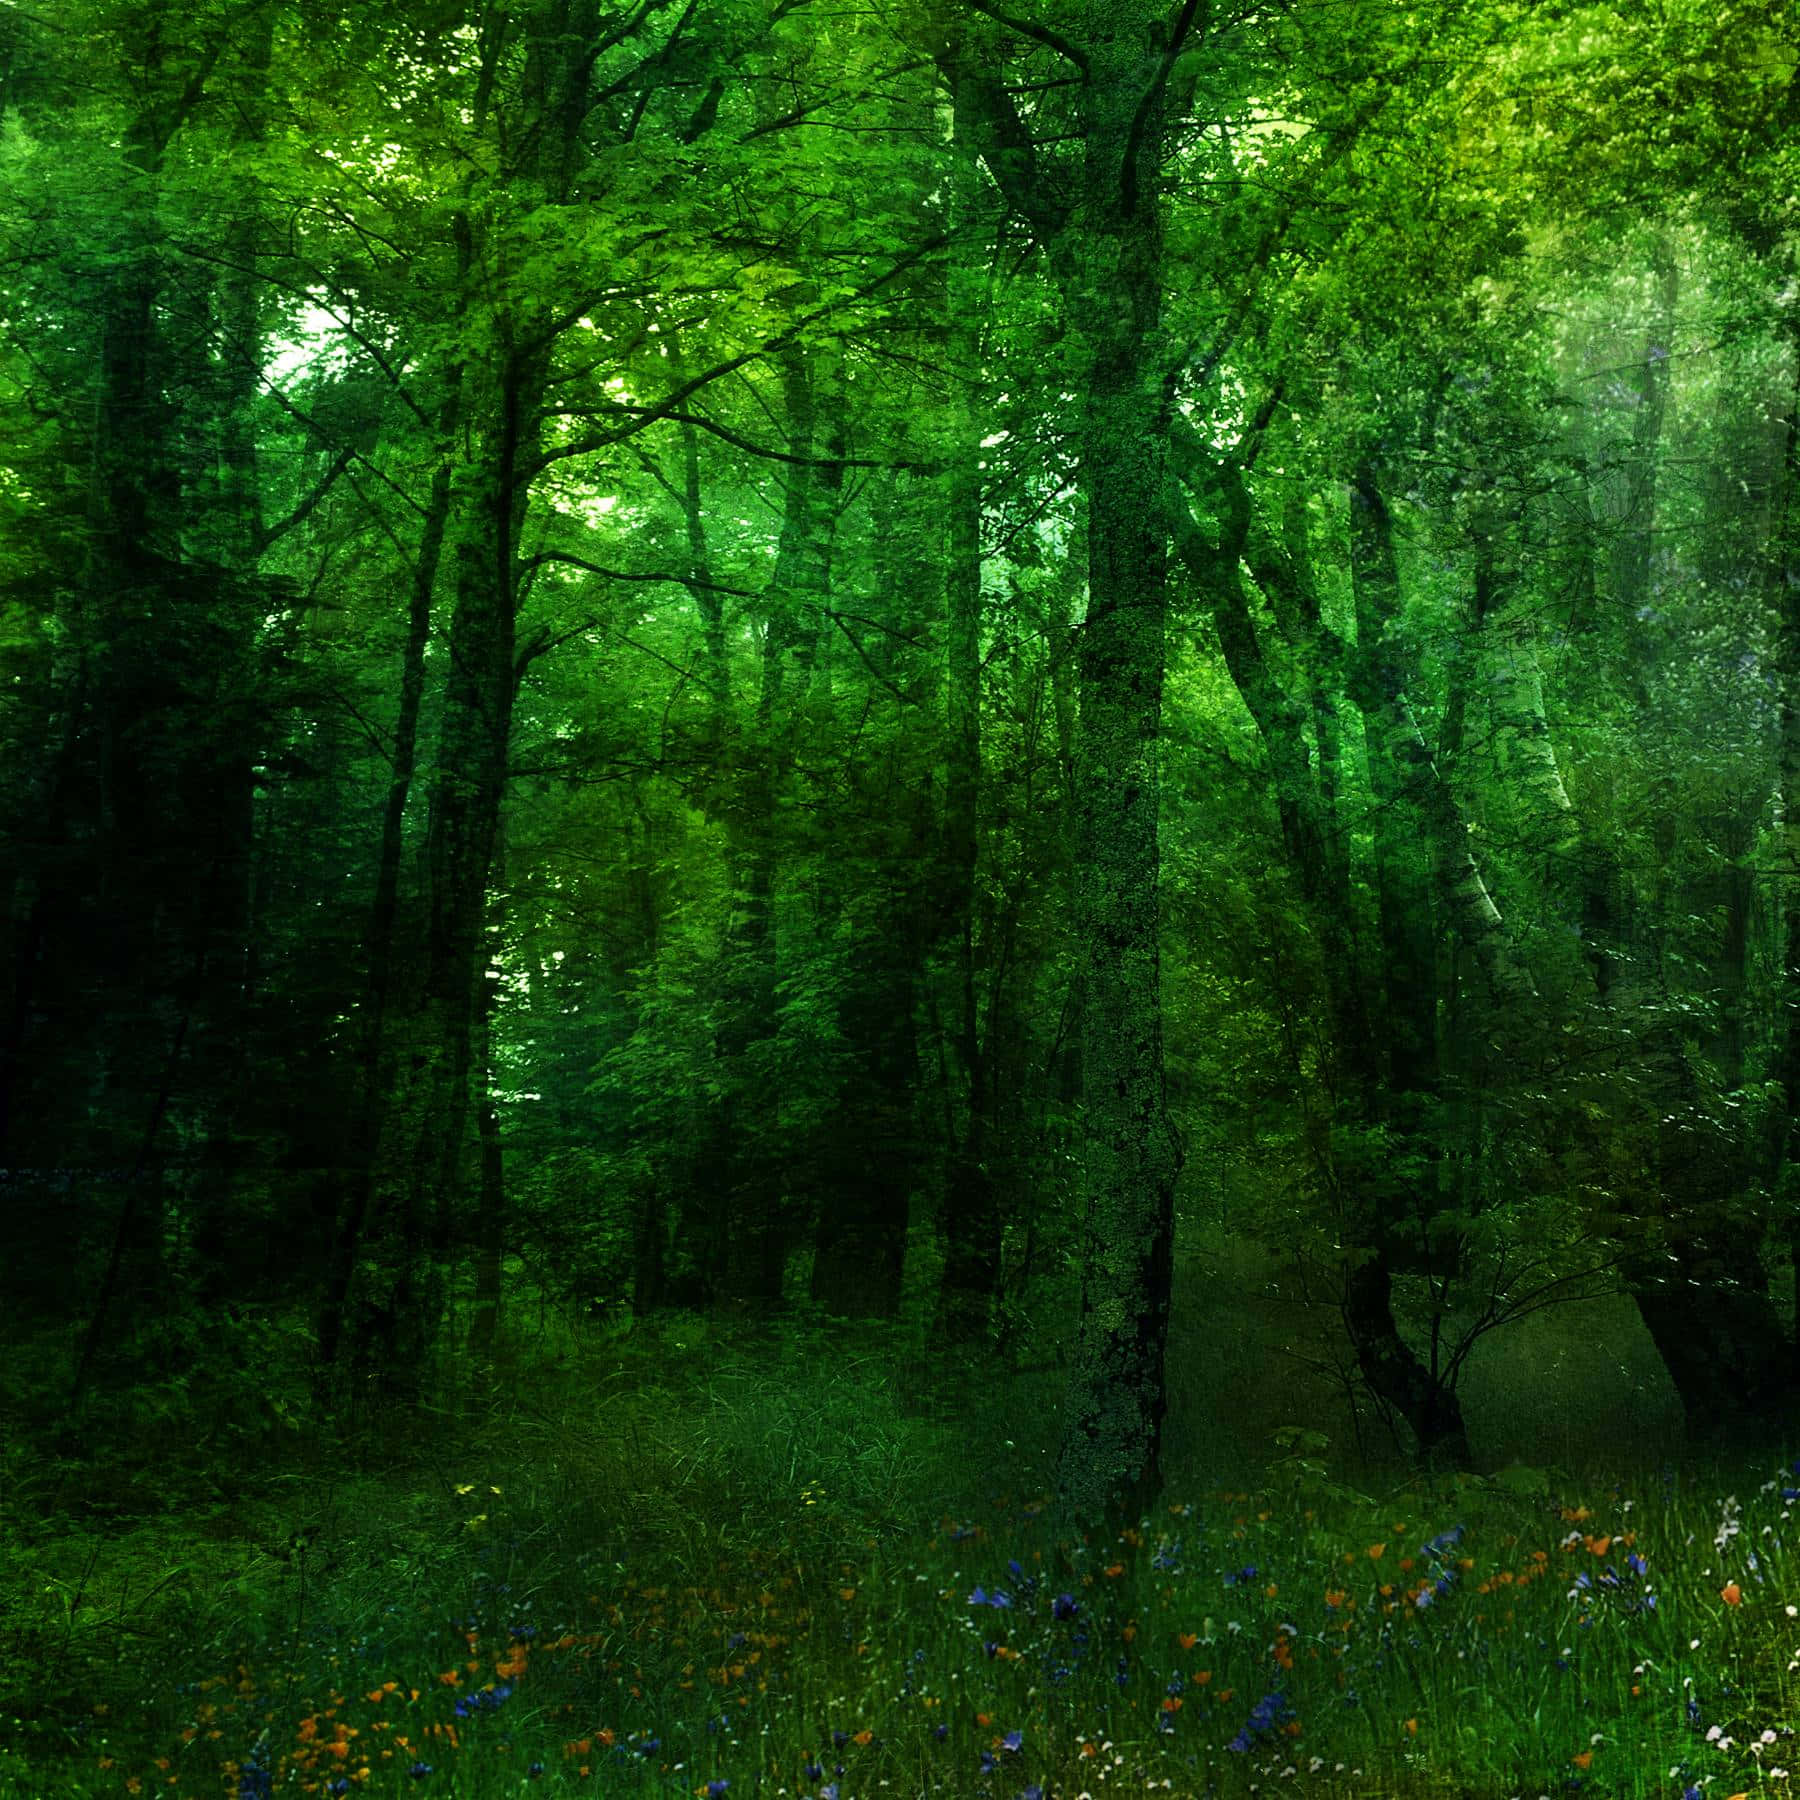 A Vibrant And Beautiful Forest Of Green Plants In All Shapes And Sizes. Background